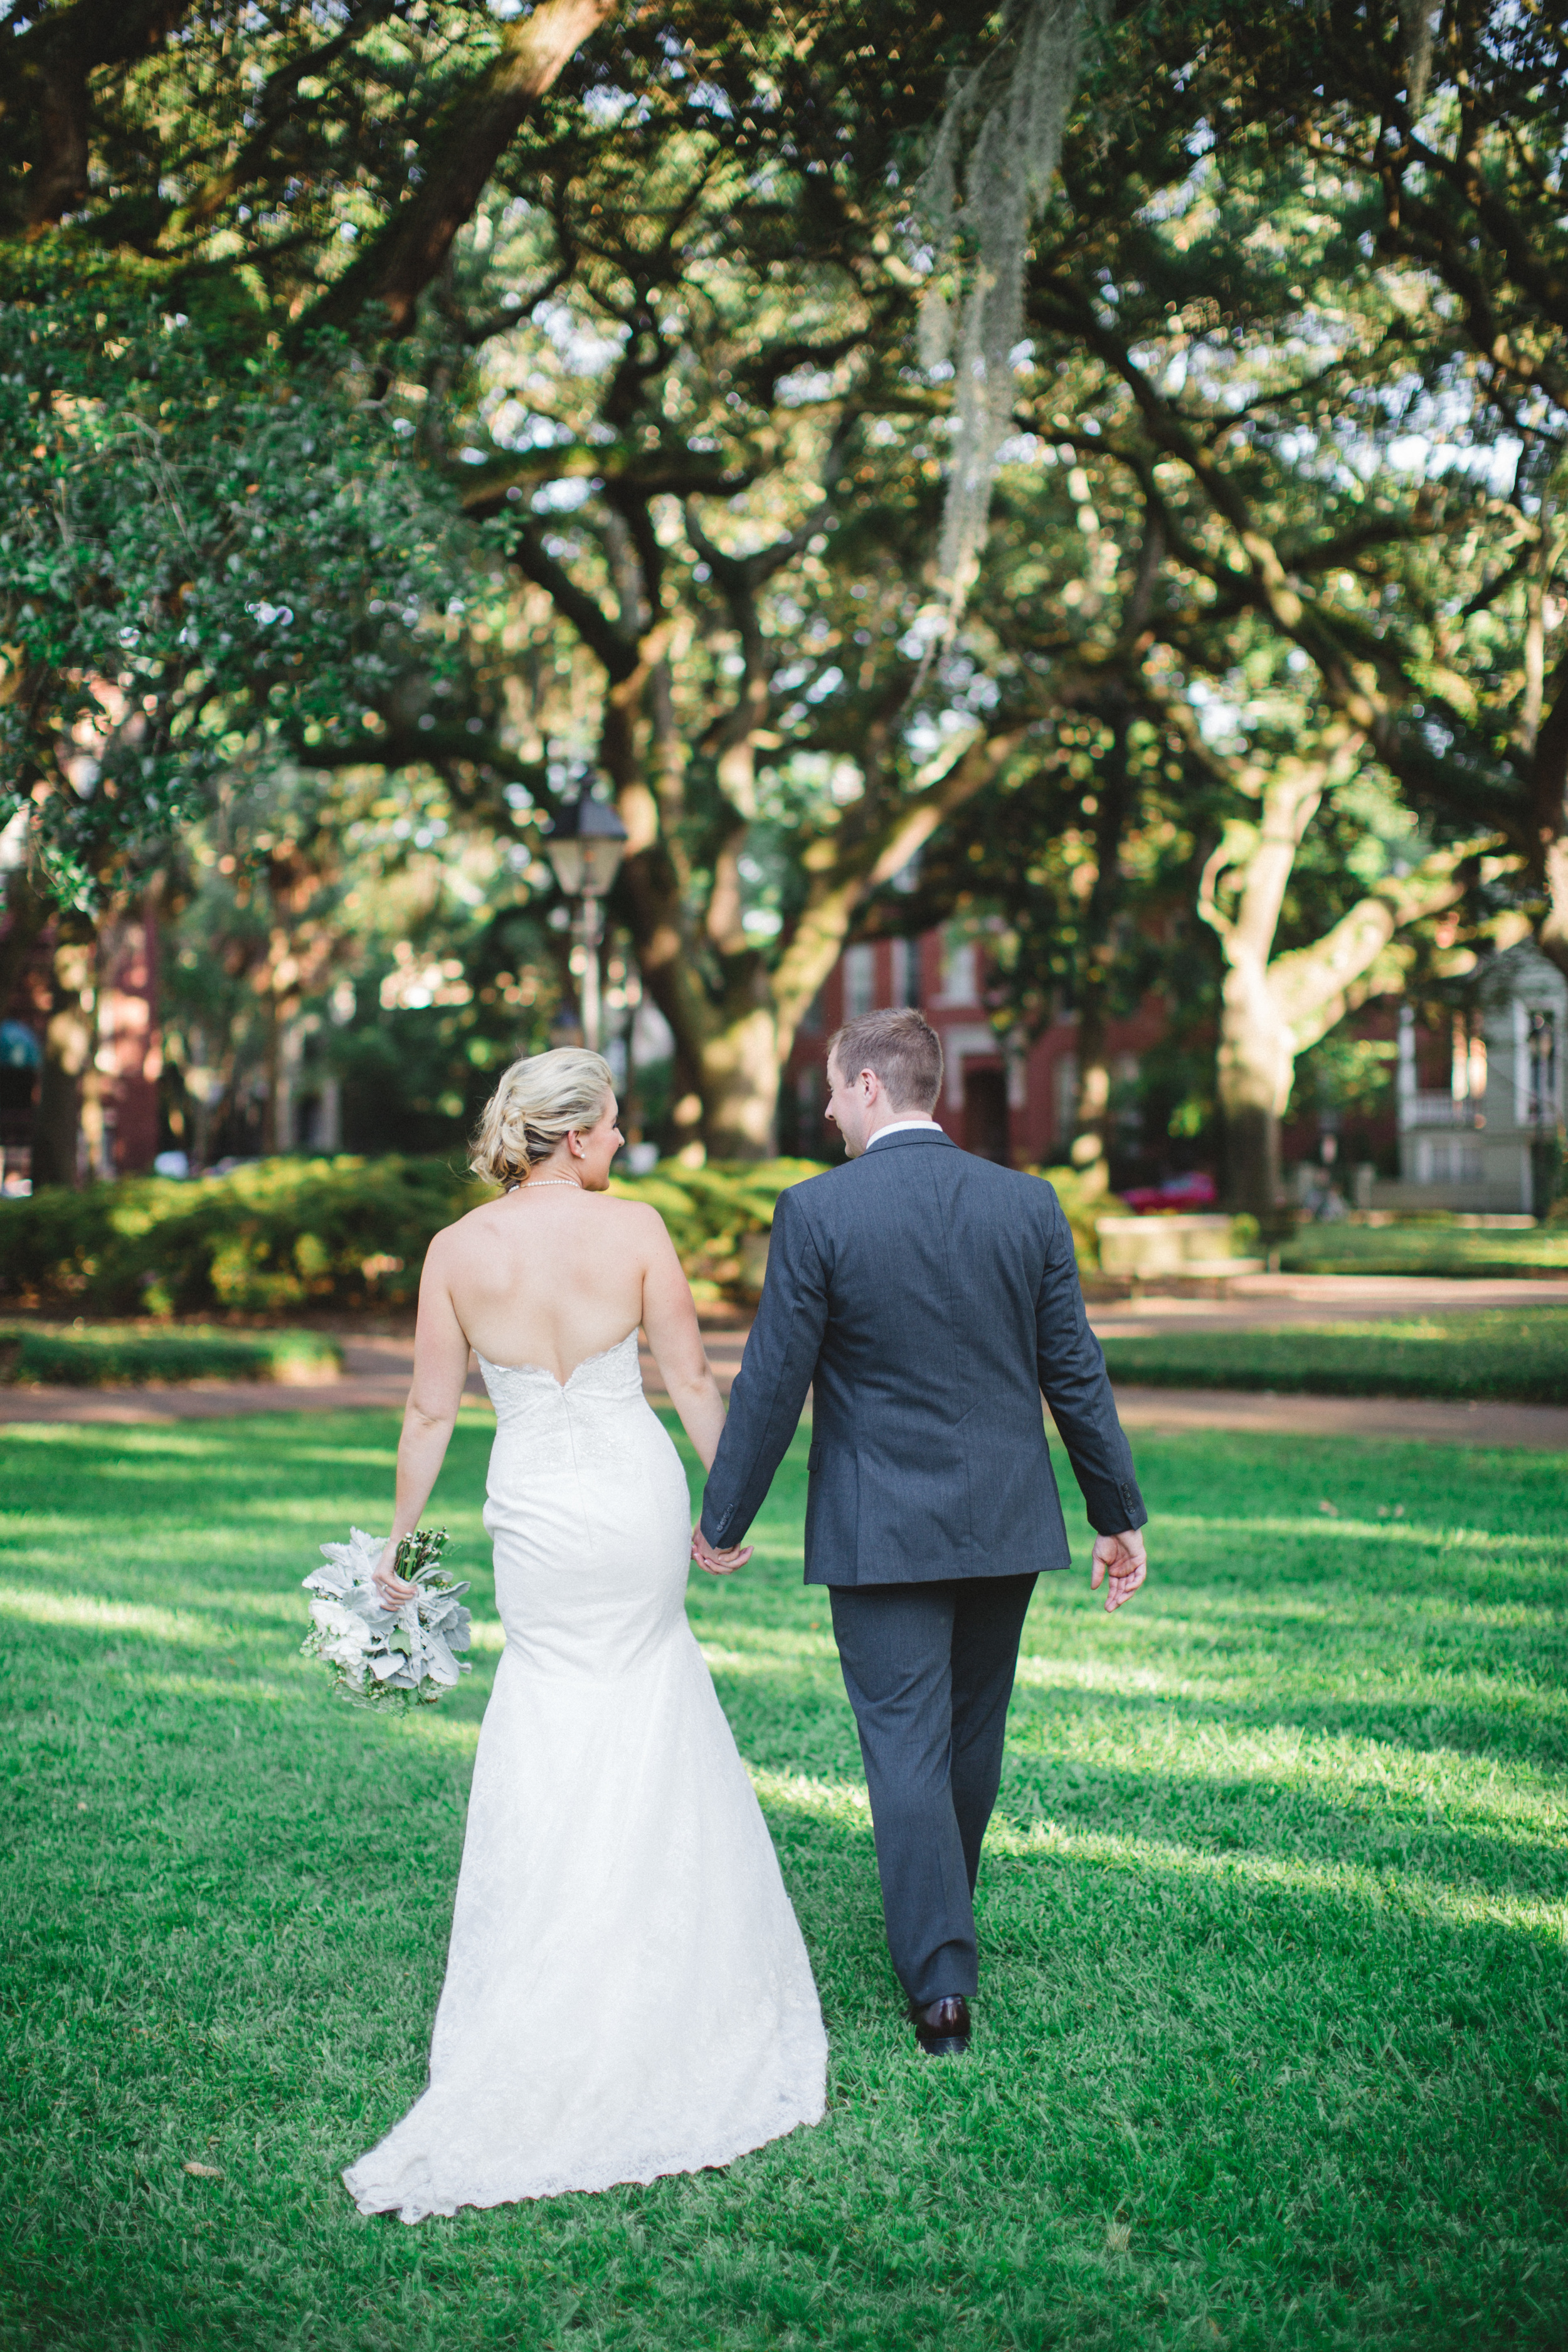 Hillary-and-Brian-izzy-hudgins-photography-anais-anette-tristan-lace-mermaid-wedding-dress-ivory-and-beau-bridal-boutique-savannah-bridal-boutique-savannah-wedding-dresses-savannah-bridal-gowns-savannah-wedding-dresses-first-babtist-savannah-26.jpg